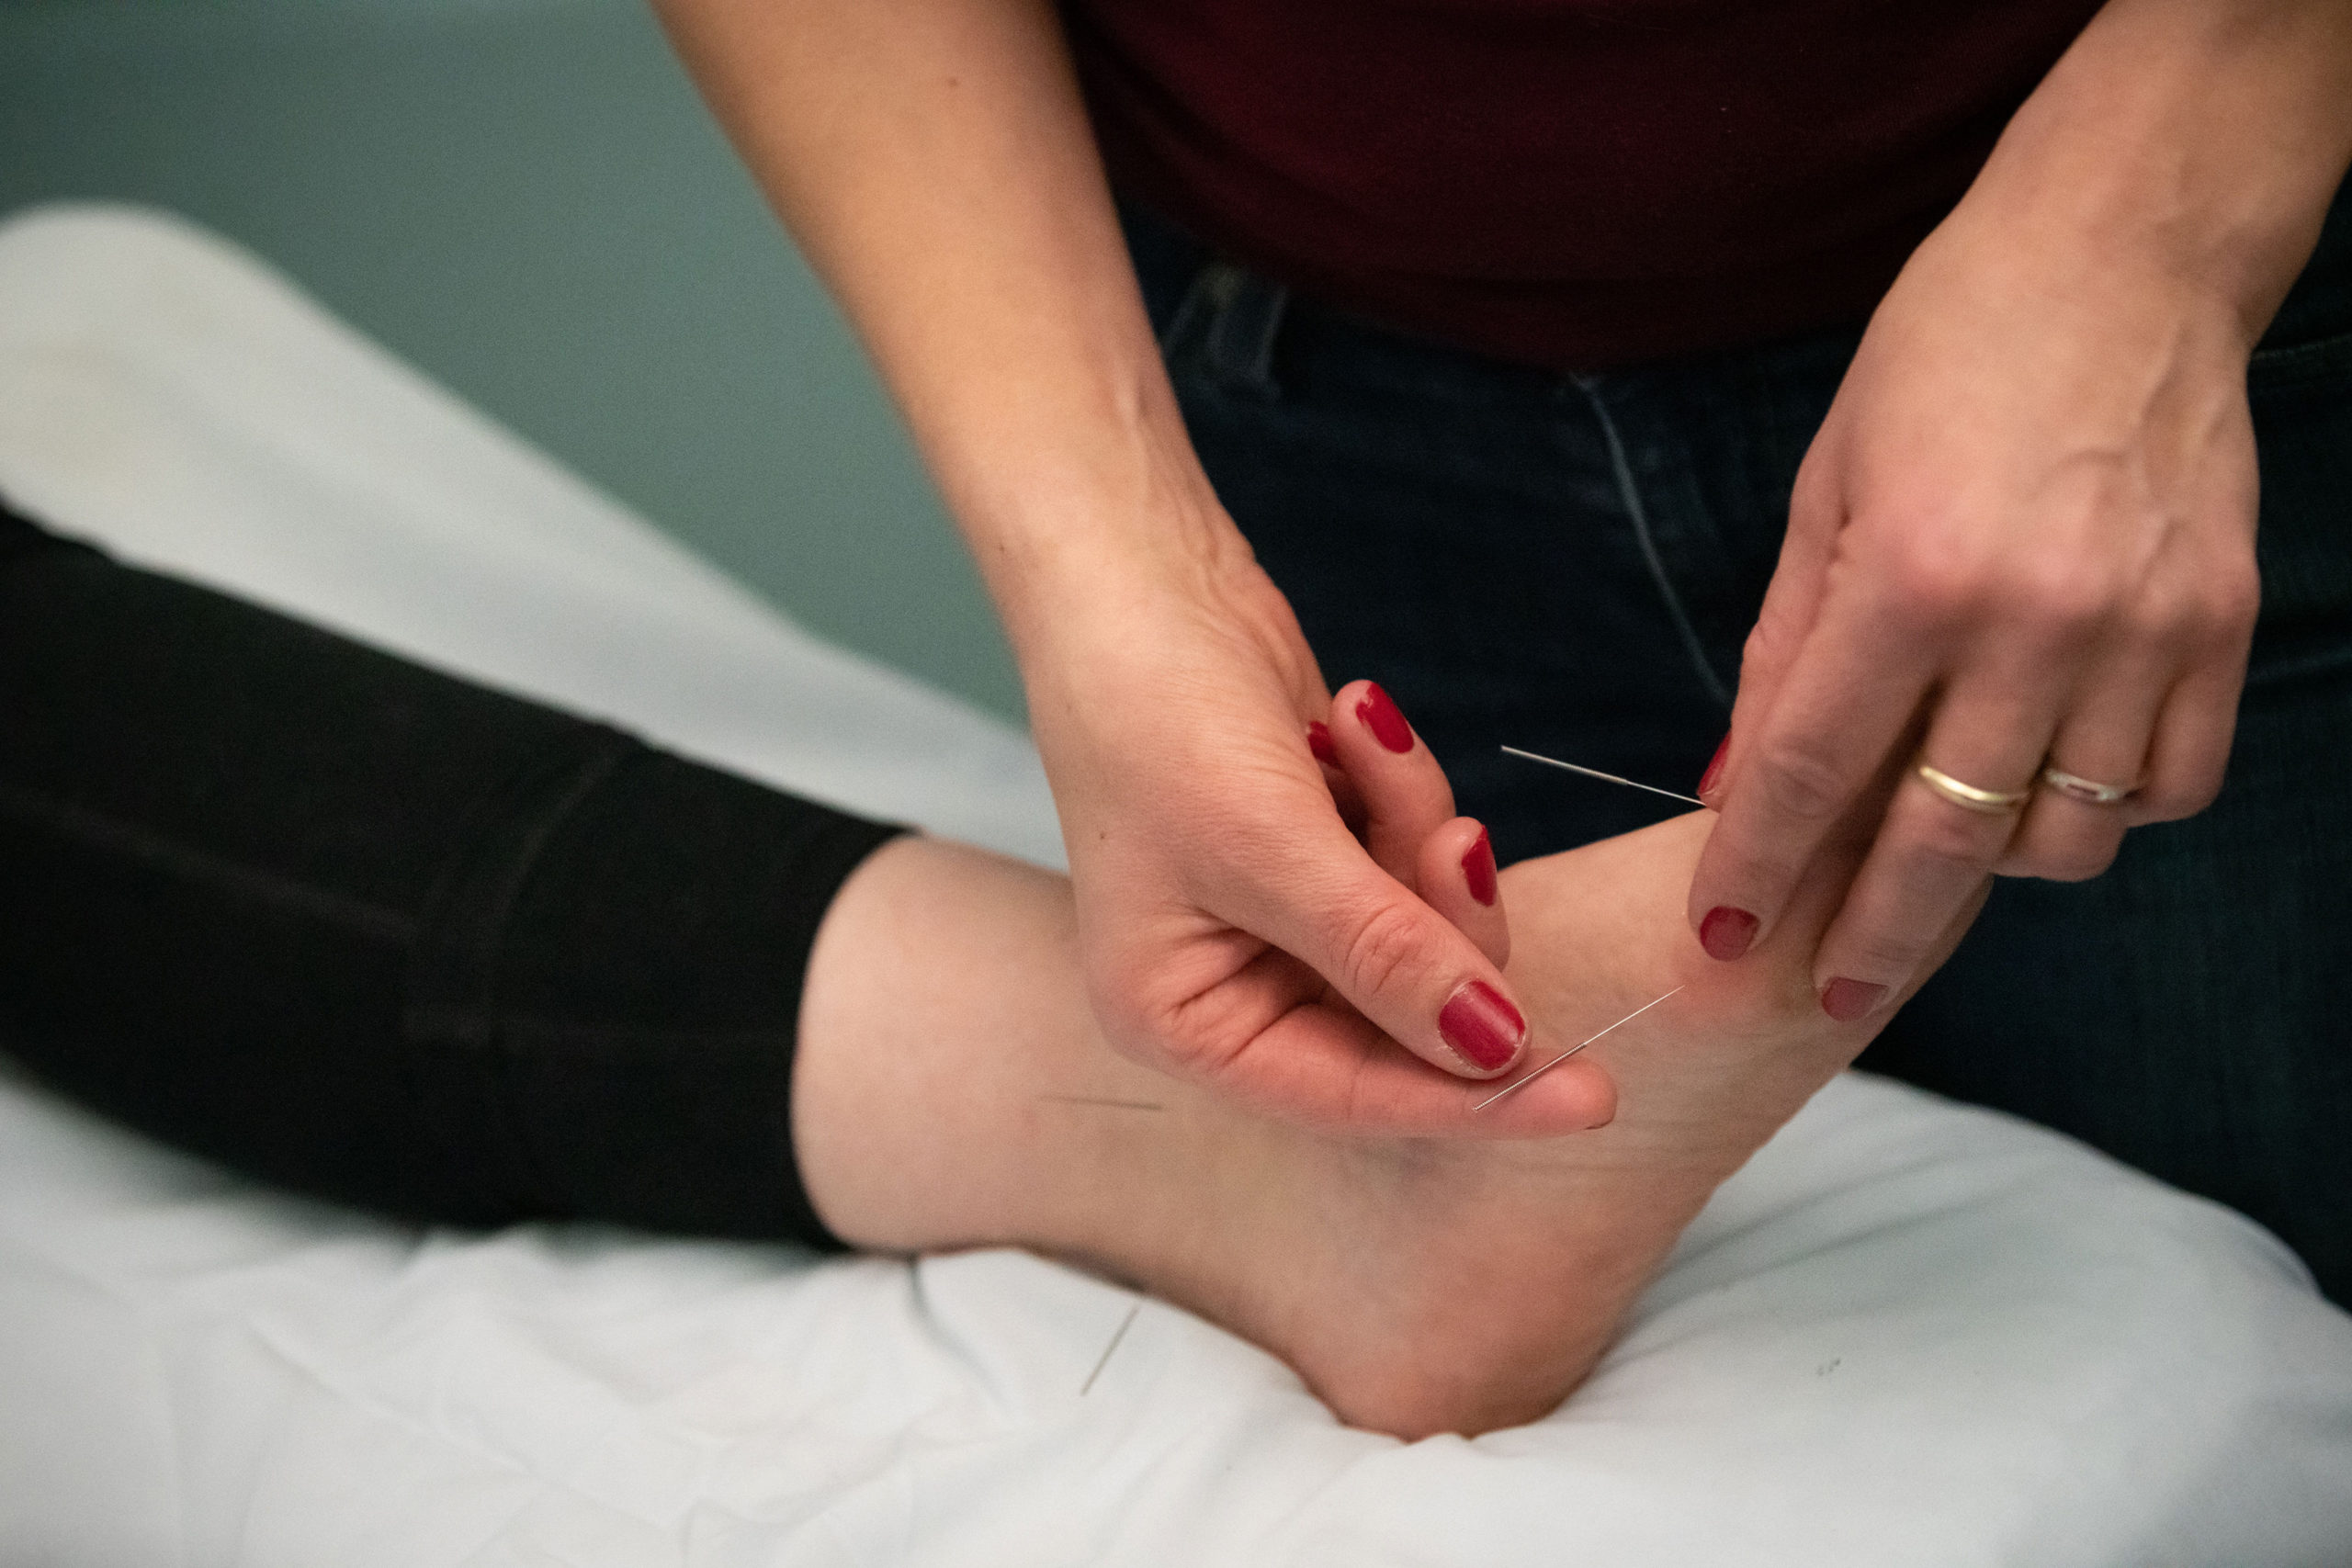 acupuncture being done on a foot